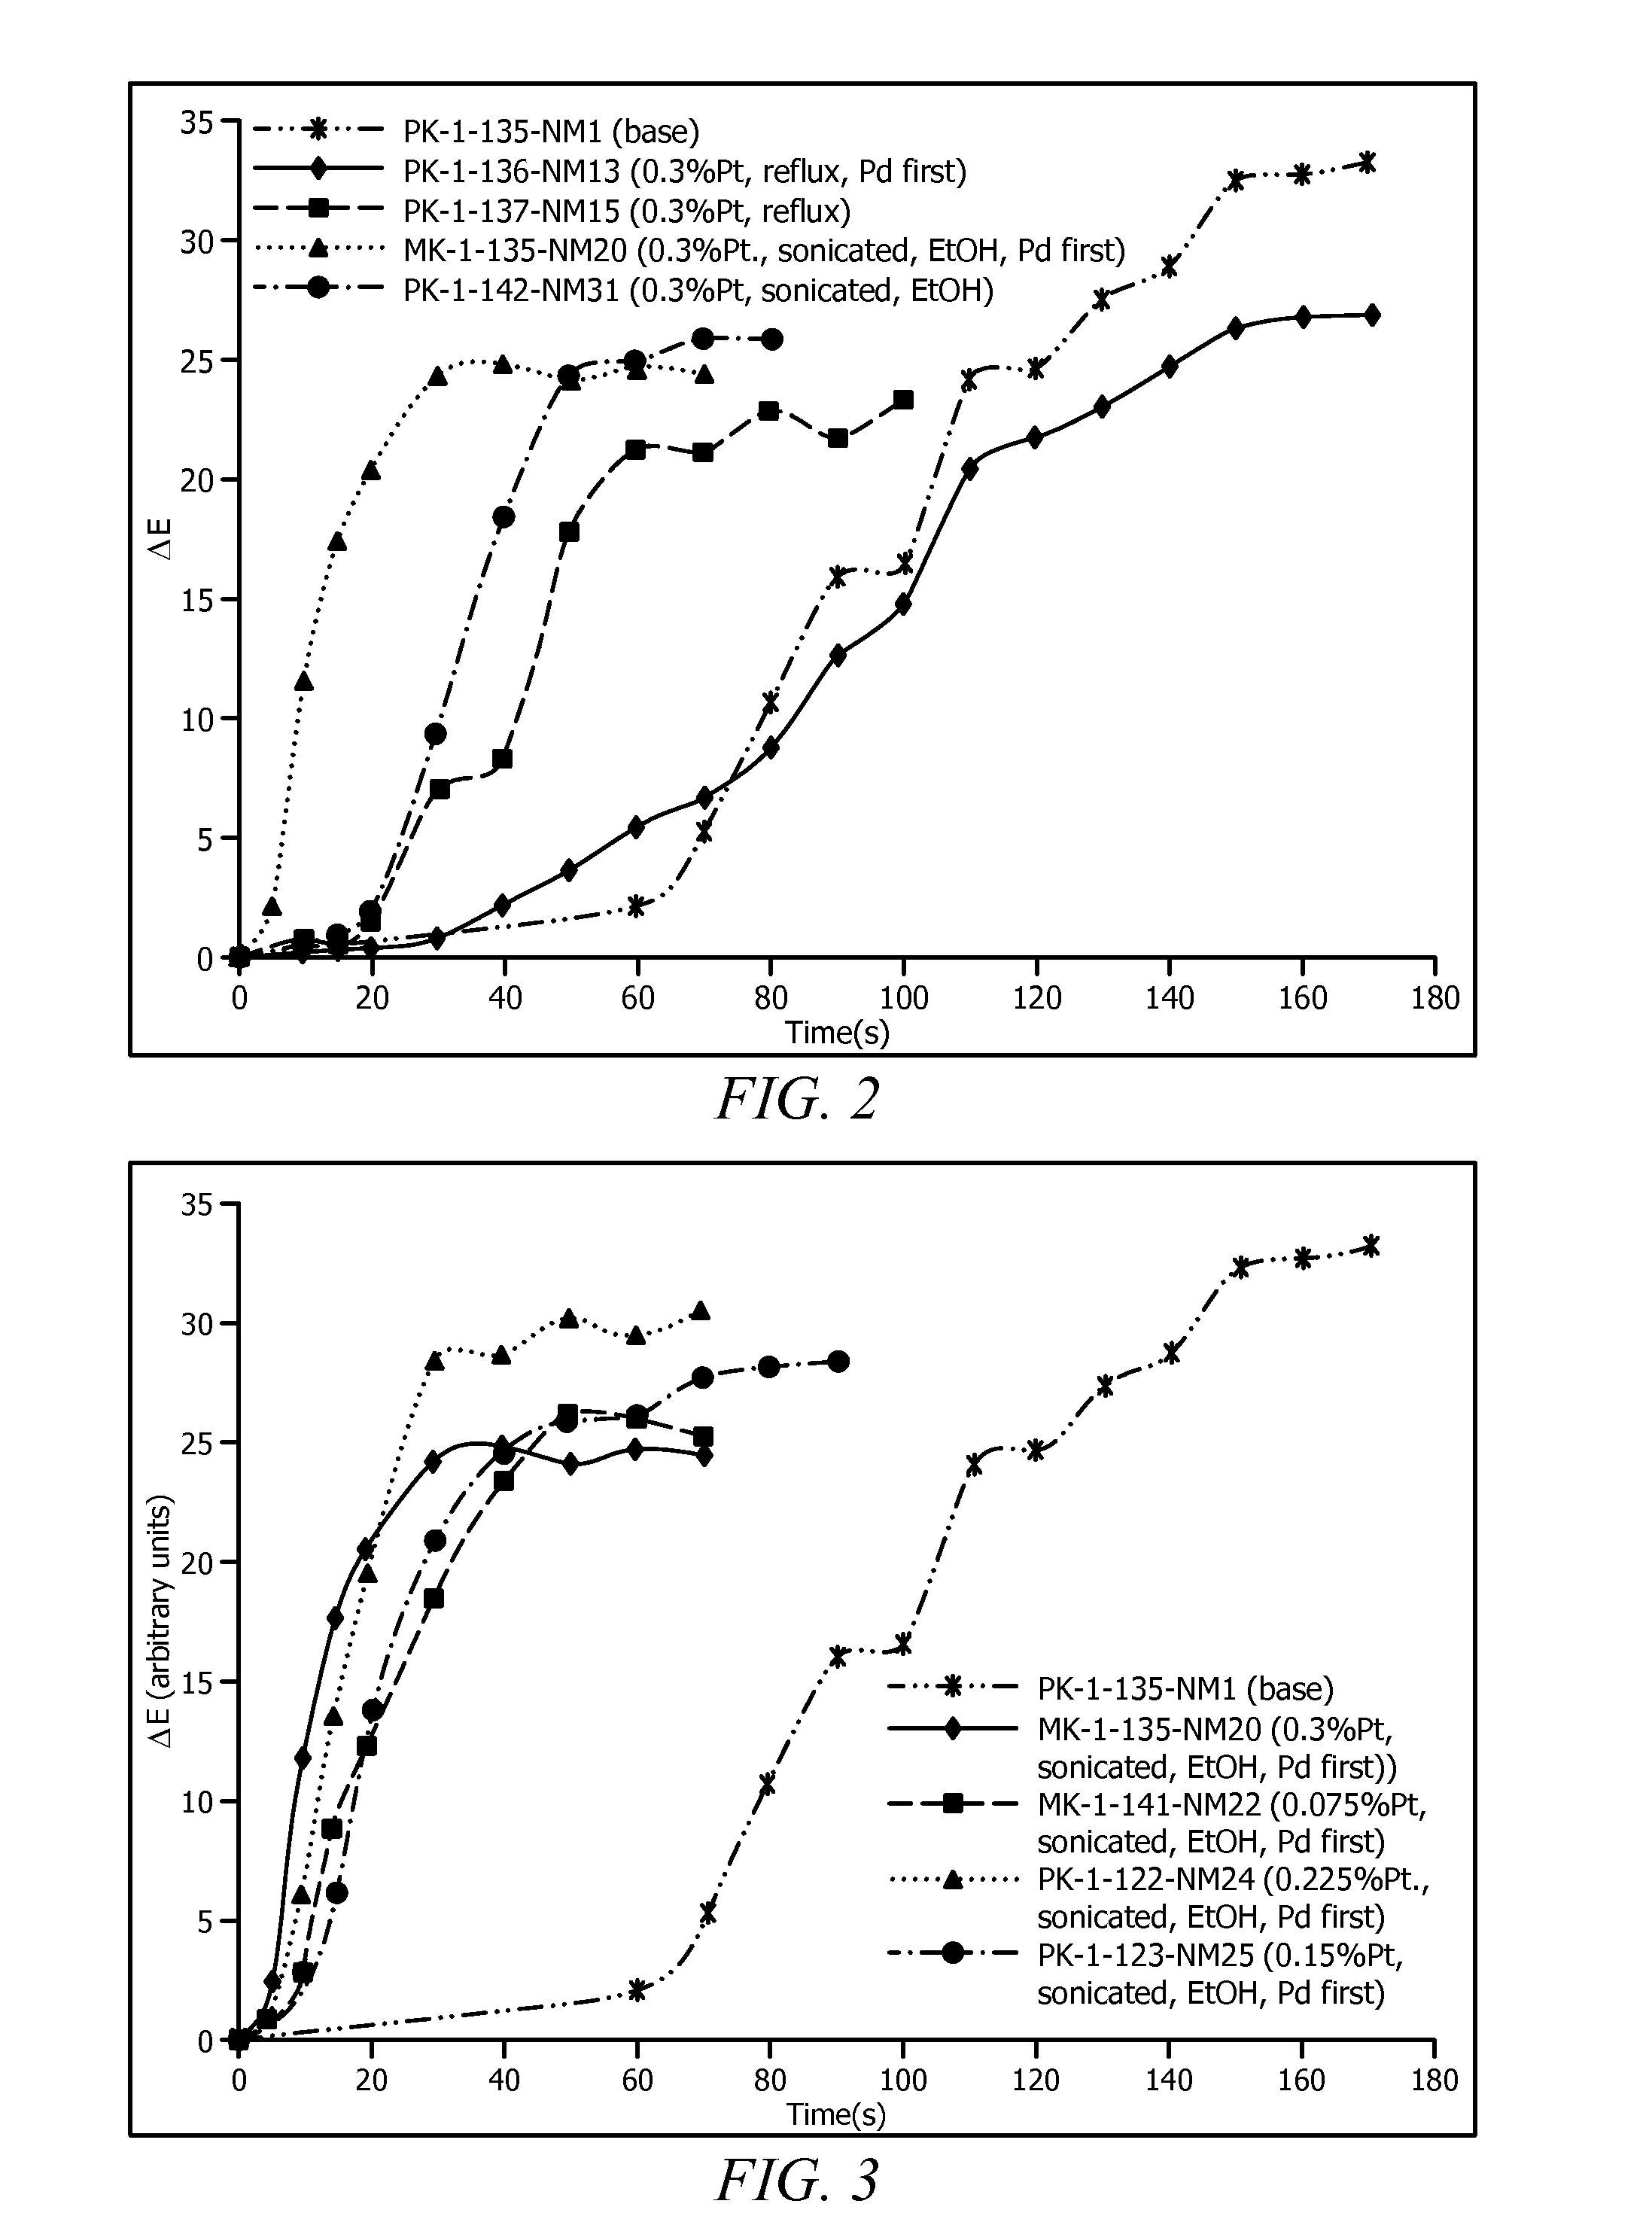 Method of forming supported doped palladium containing oxidation catalysts